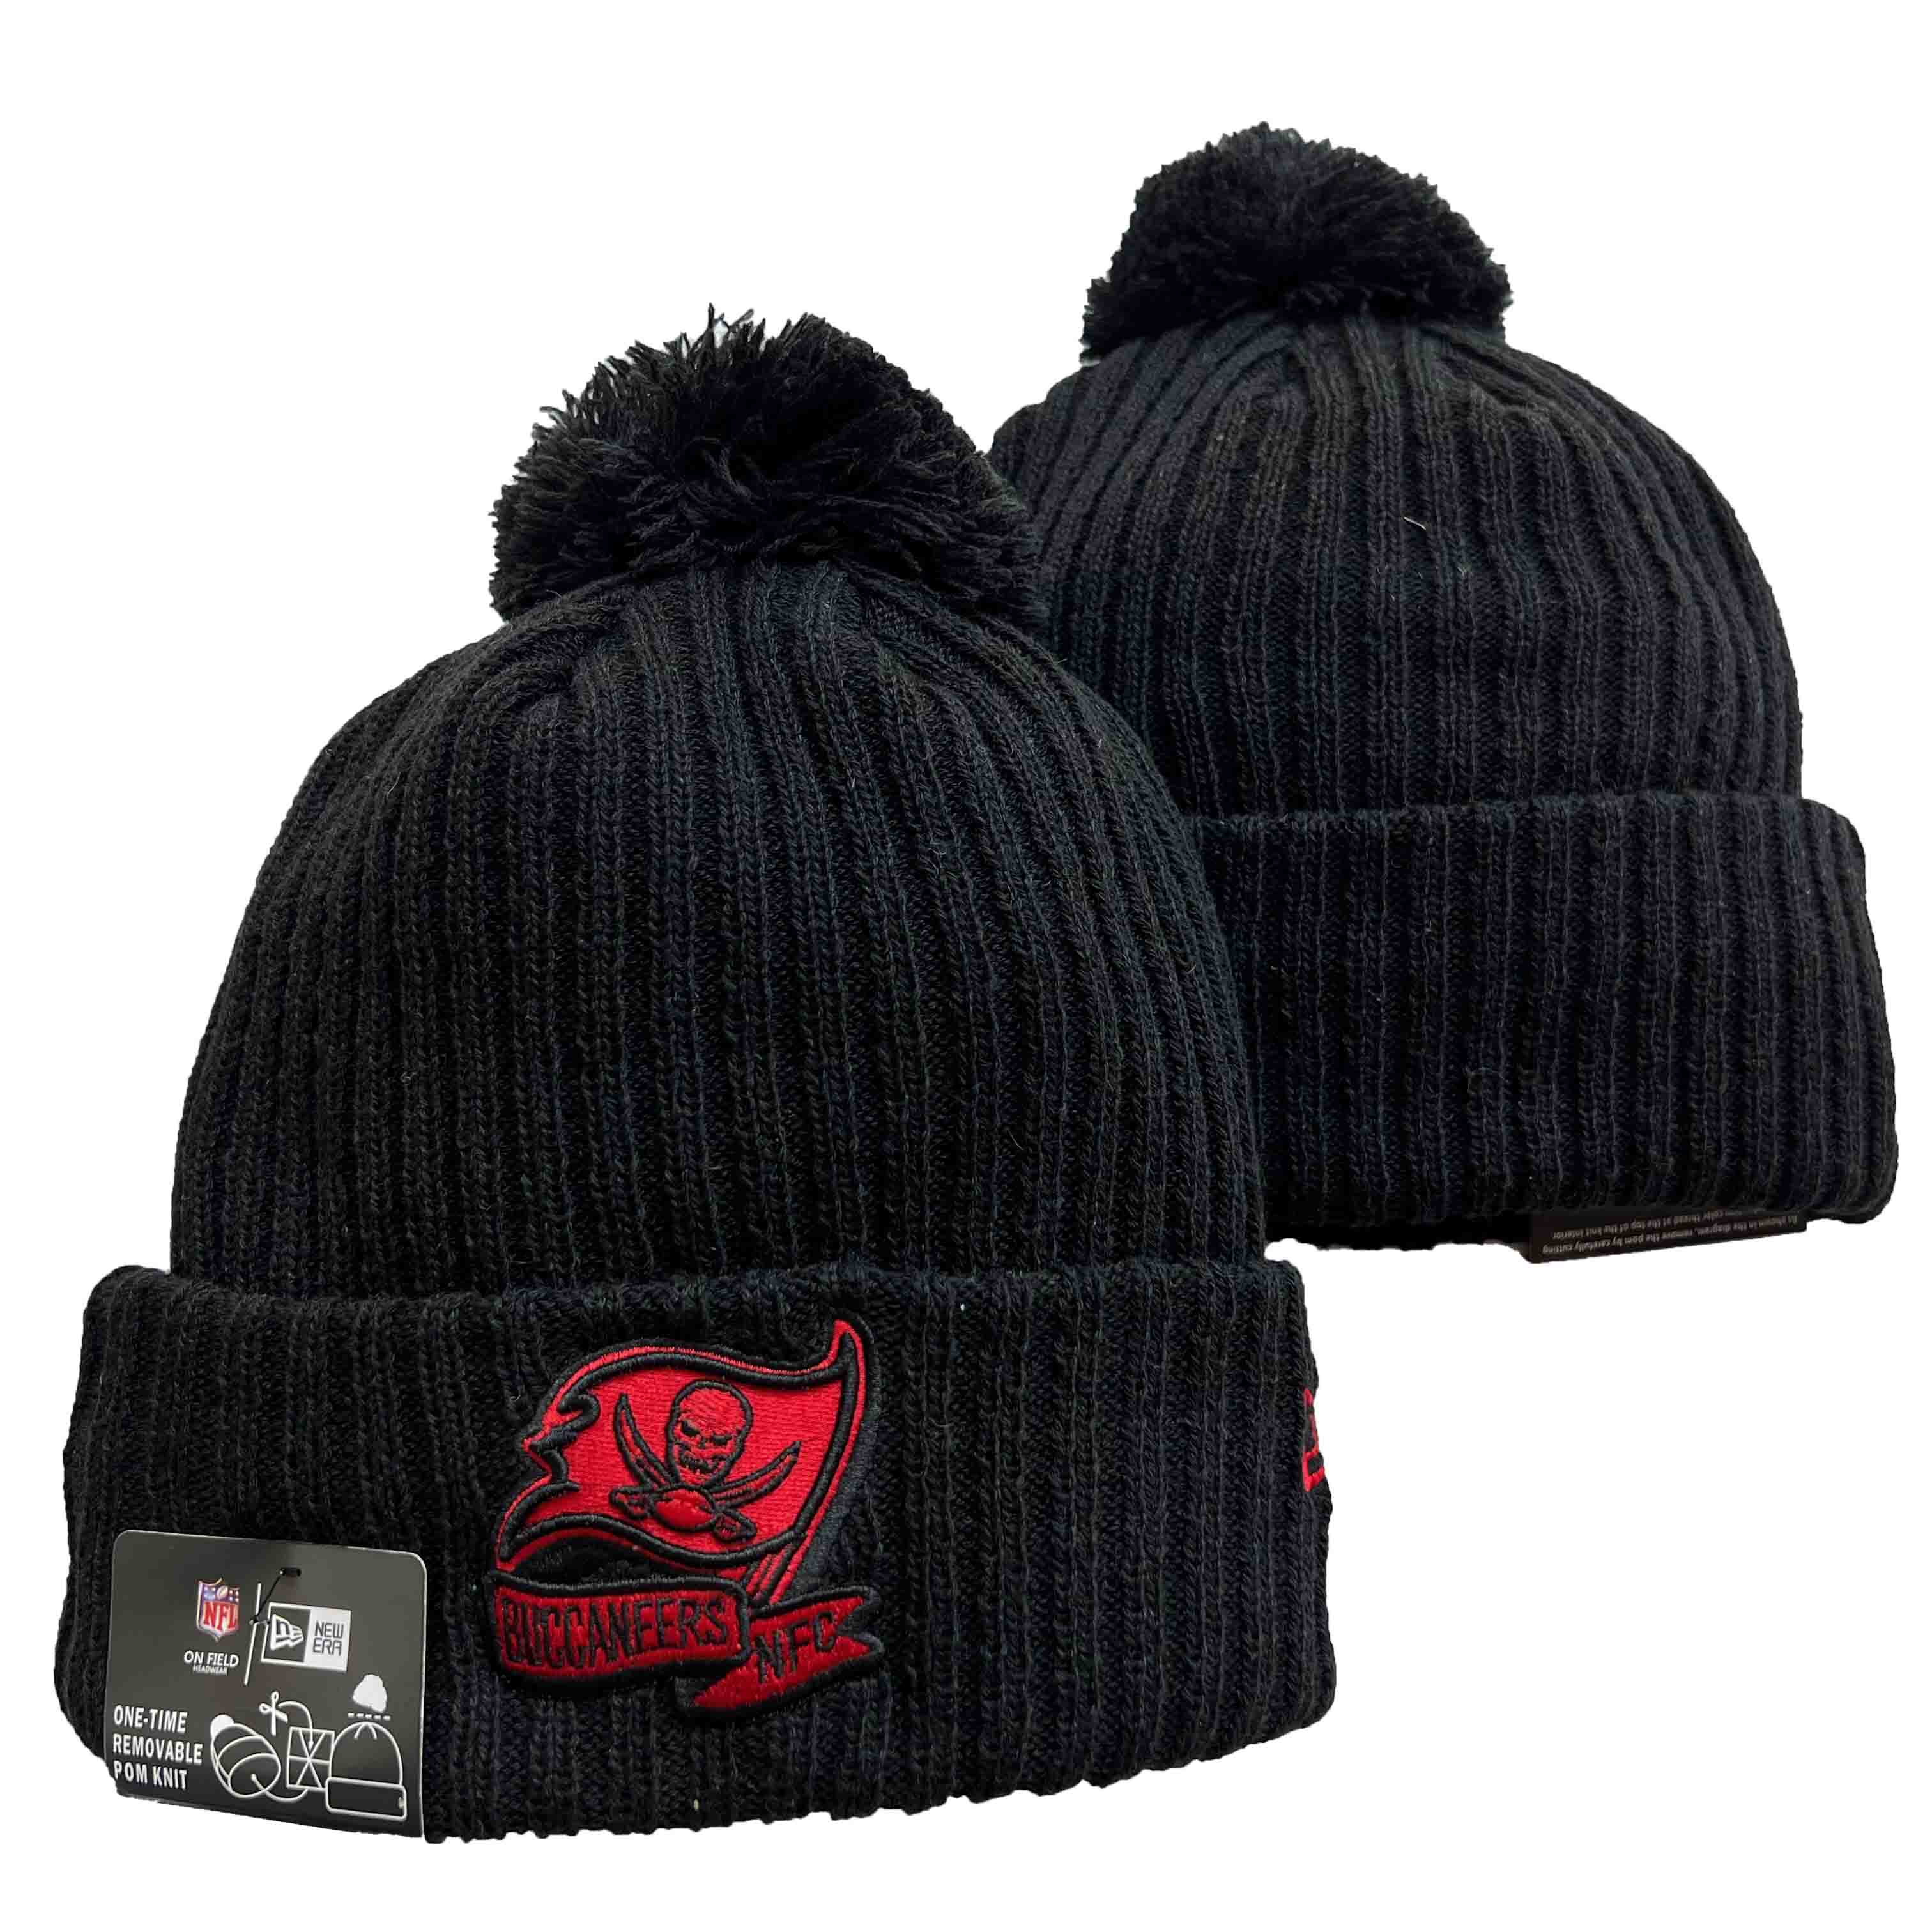 Tampa Bay Buccaneers Knit Hats 0210